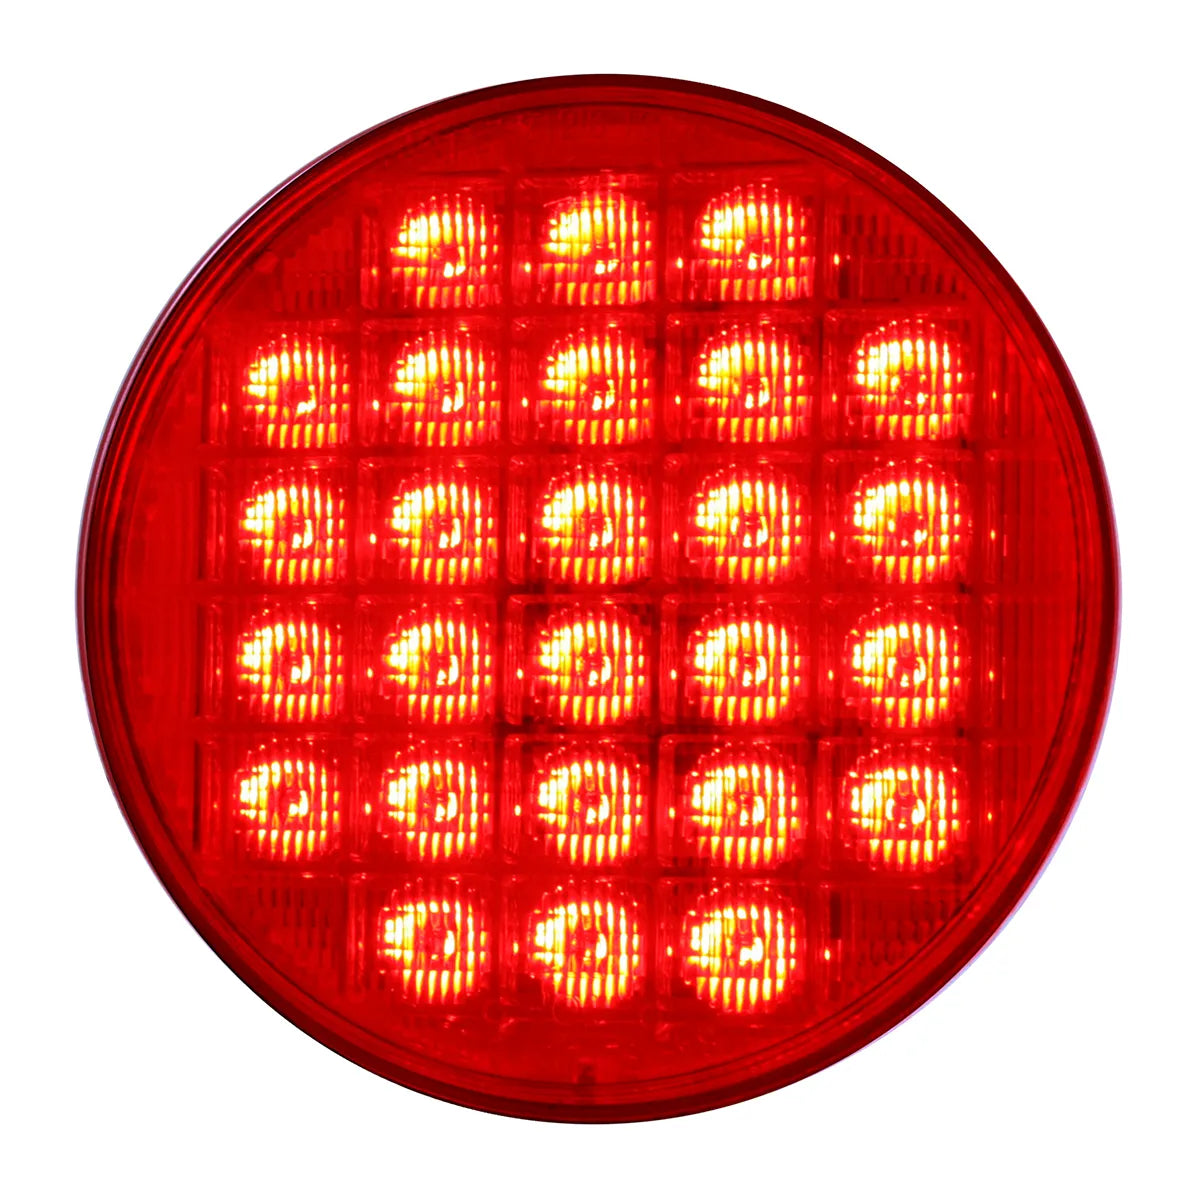 4″ SMART DYNAMIC SEQUENTIAL LED LIGHT RED/RED